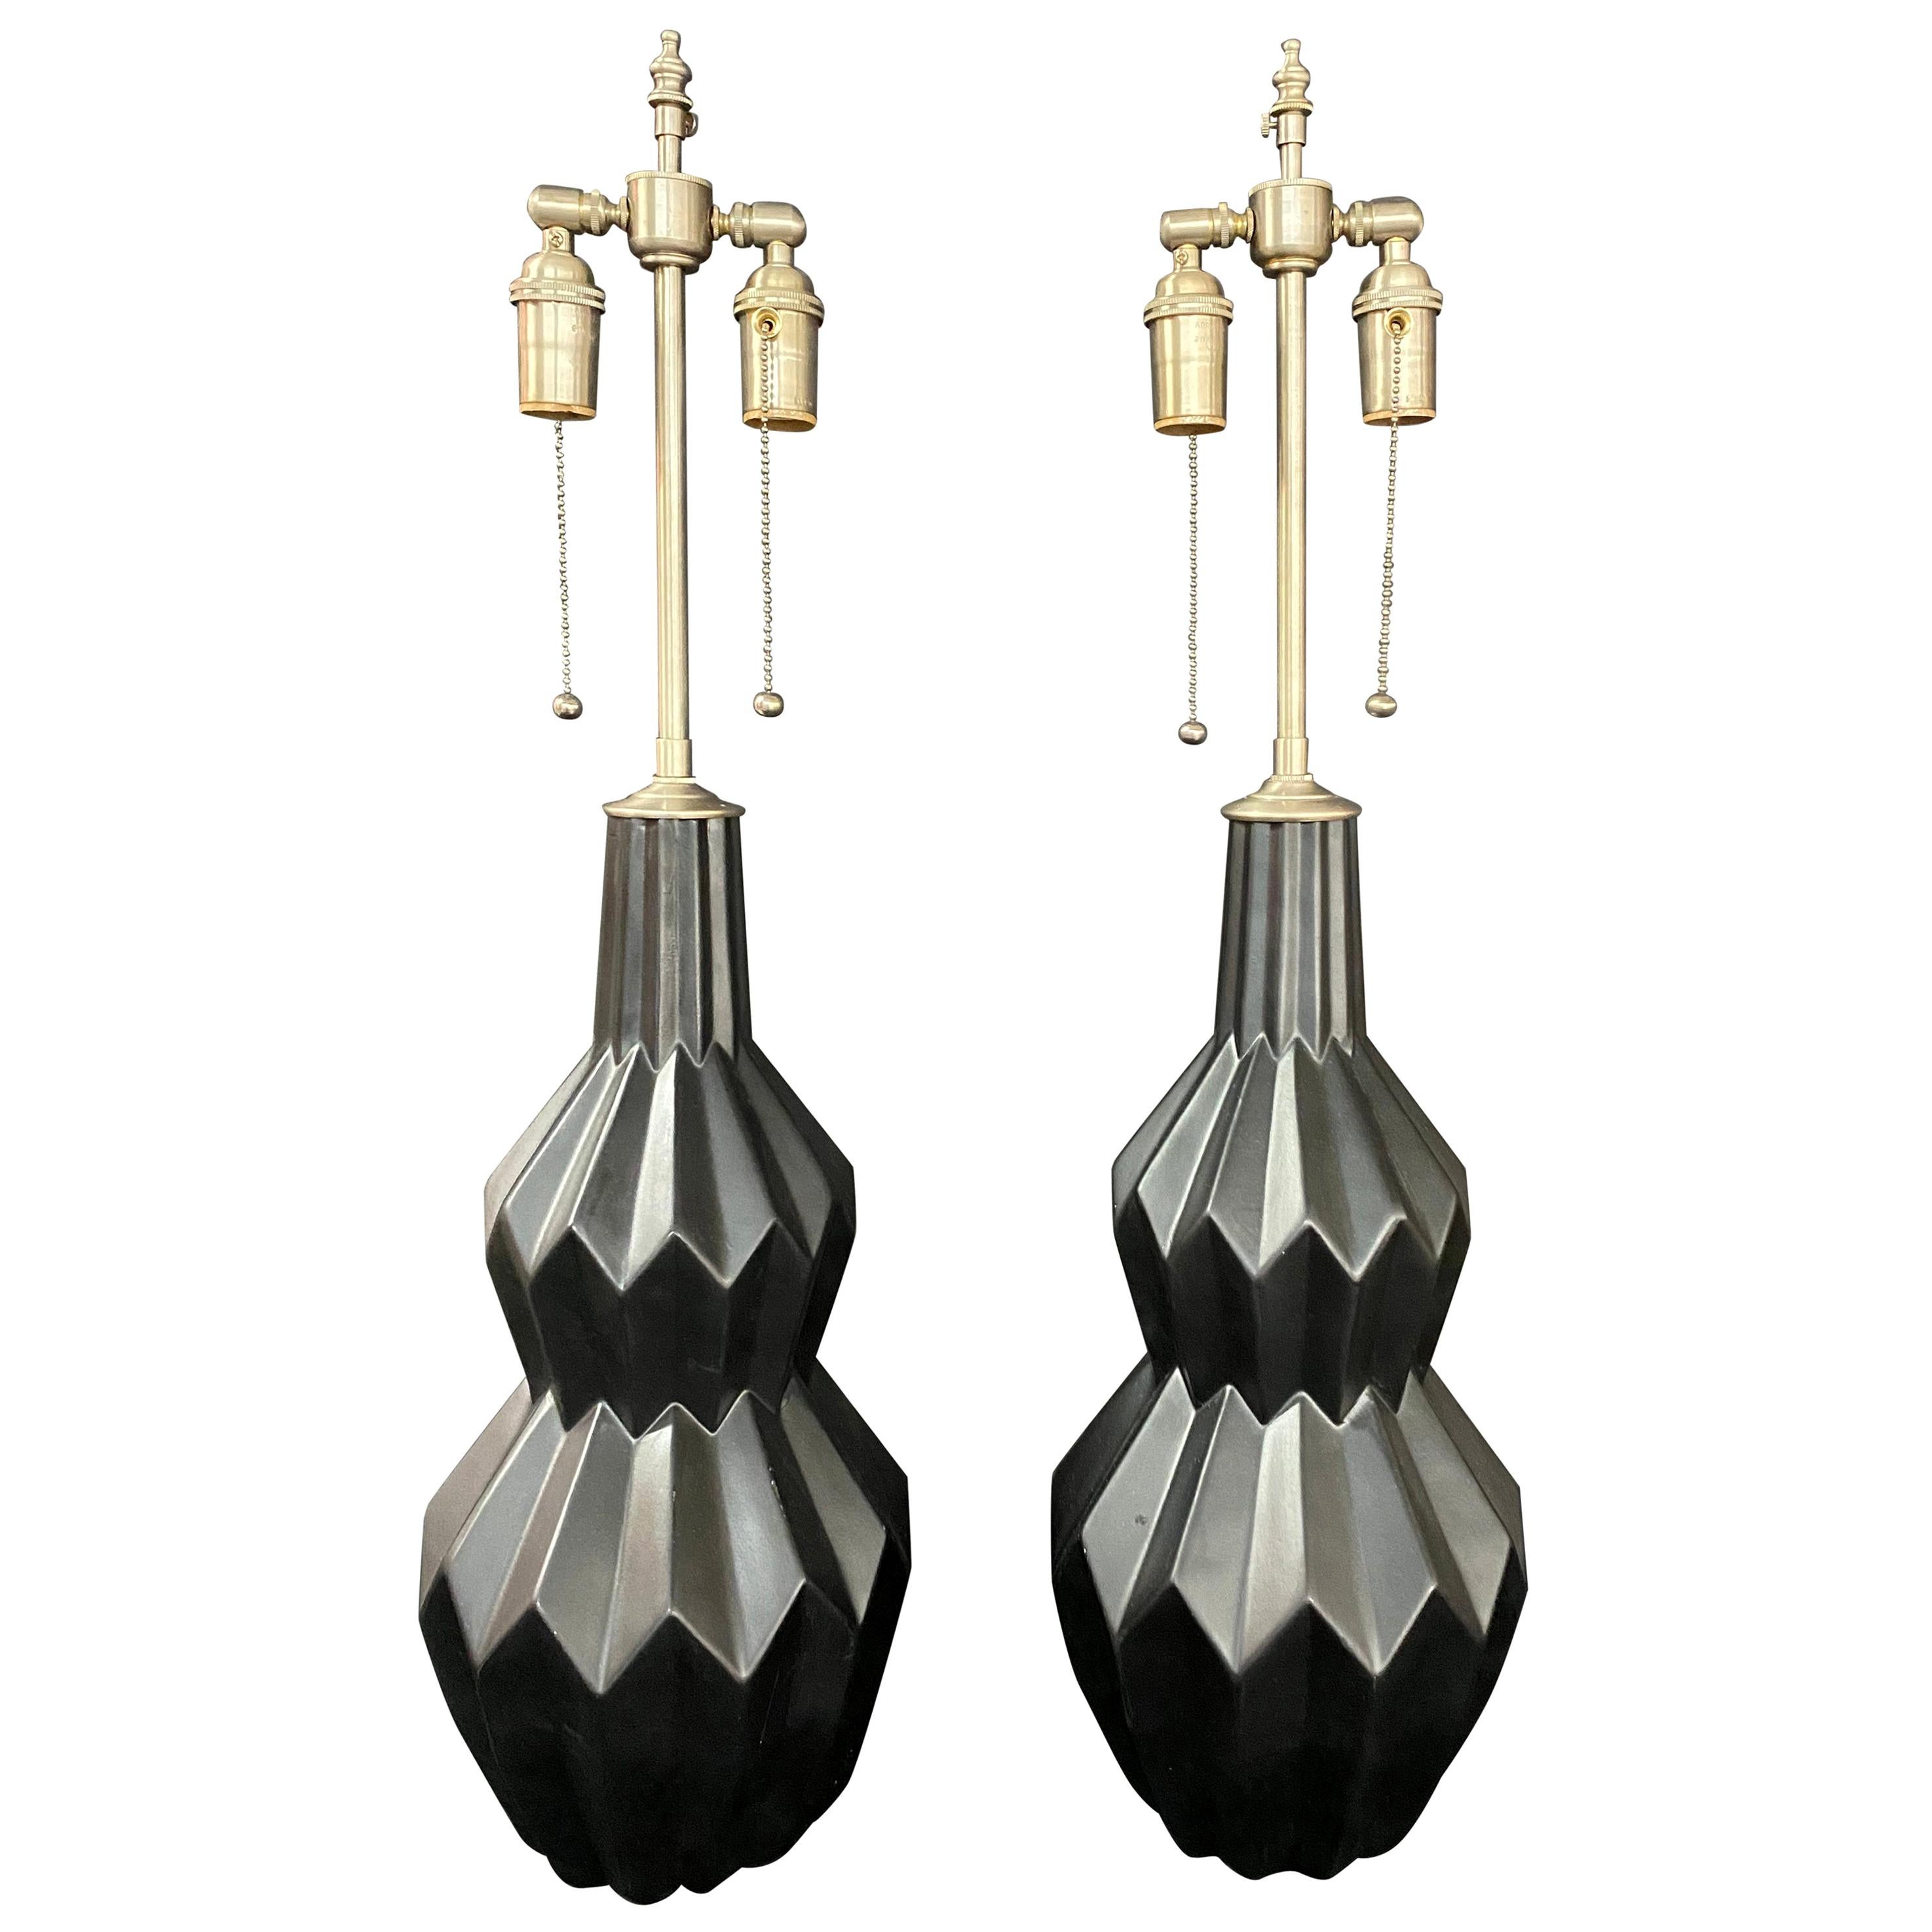 Pair of Black Charcoal Matte Diamond Shaped Table Lamps